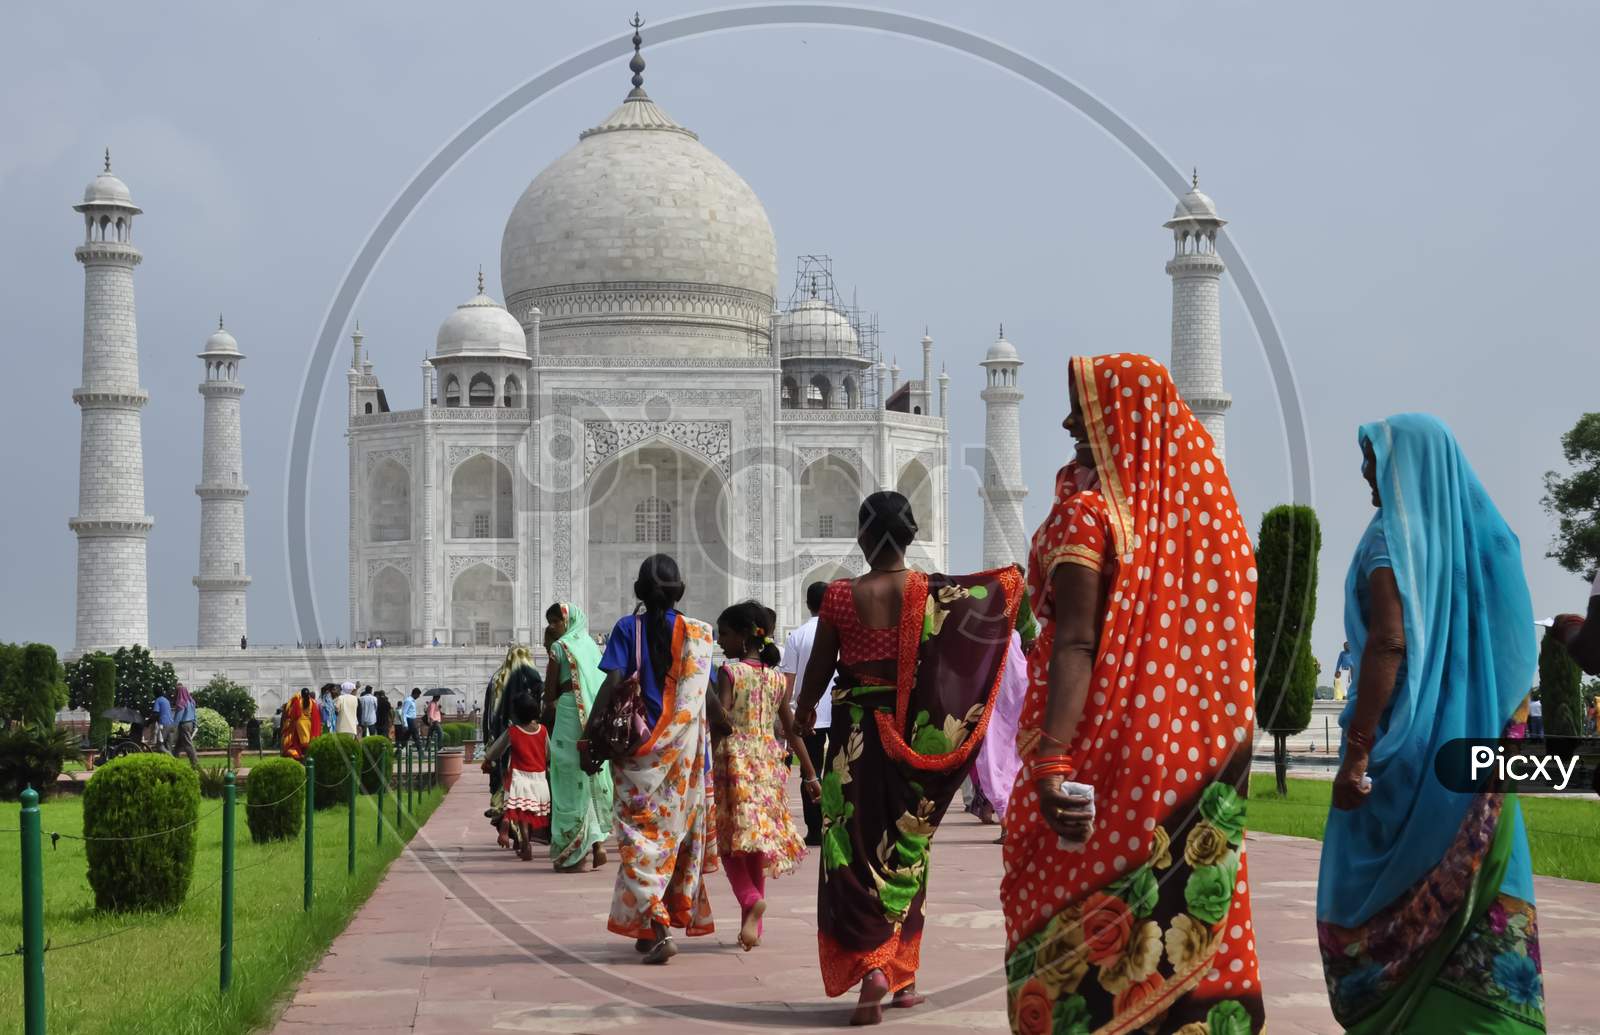 Taj mahal is a indian monument which is located in the city of agra, india